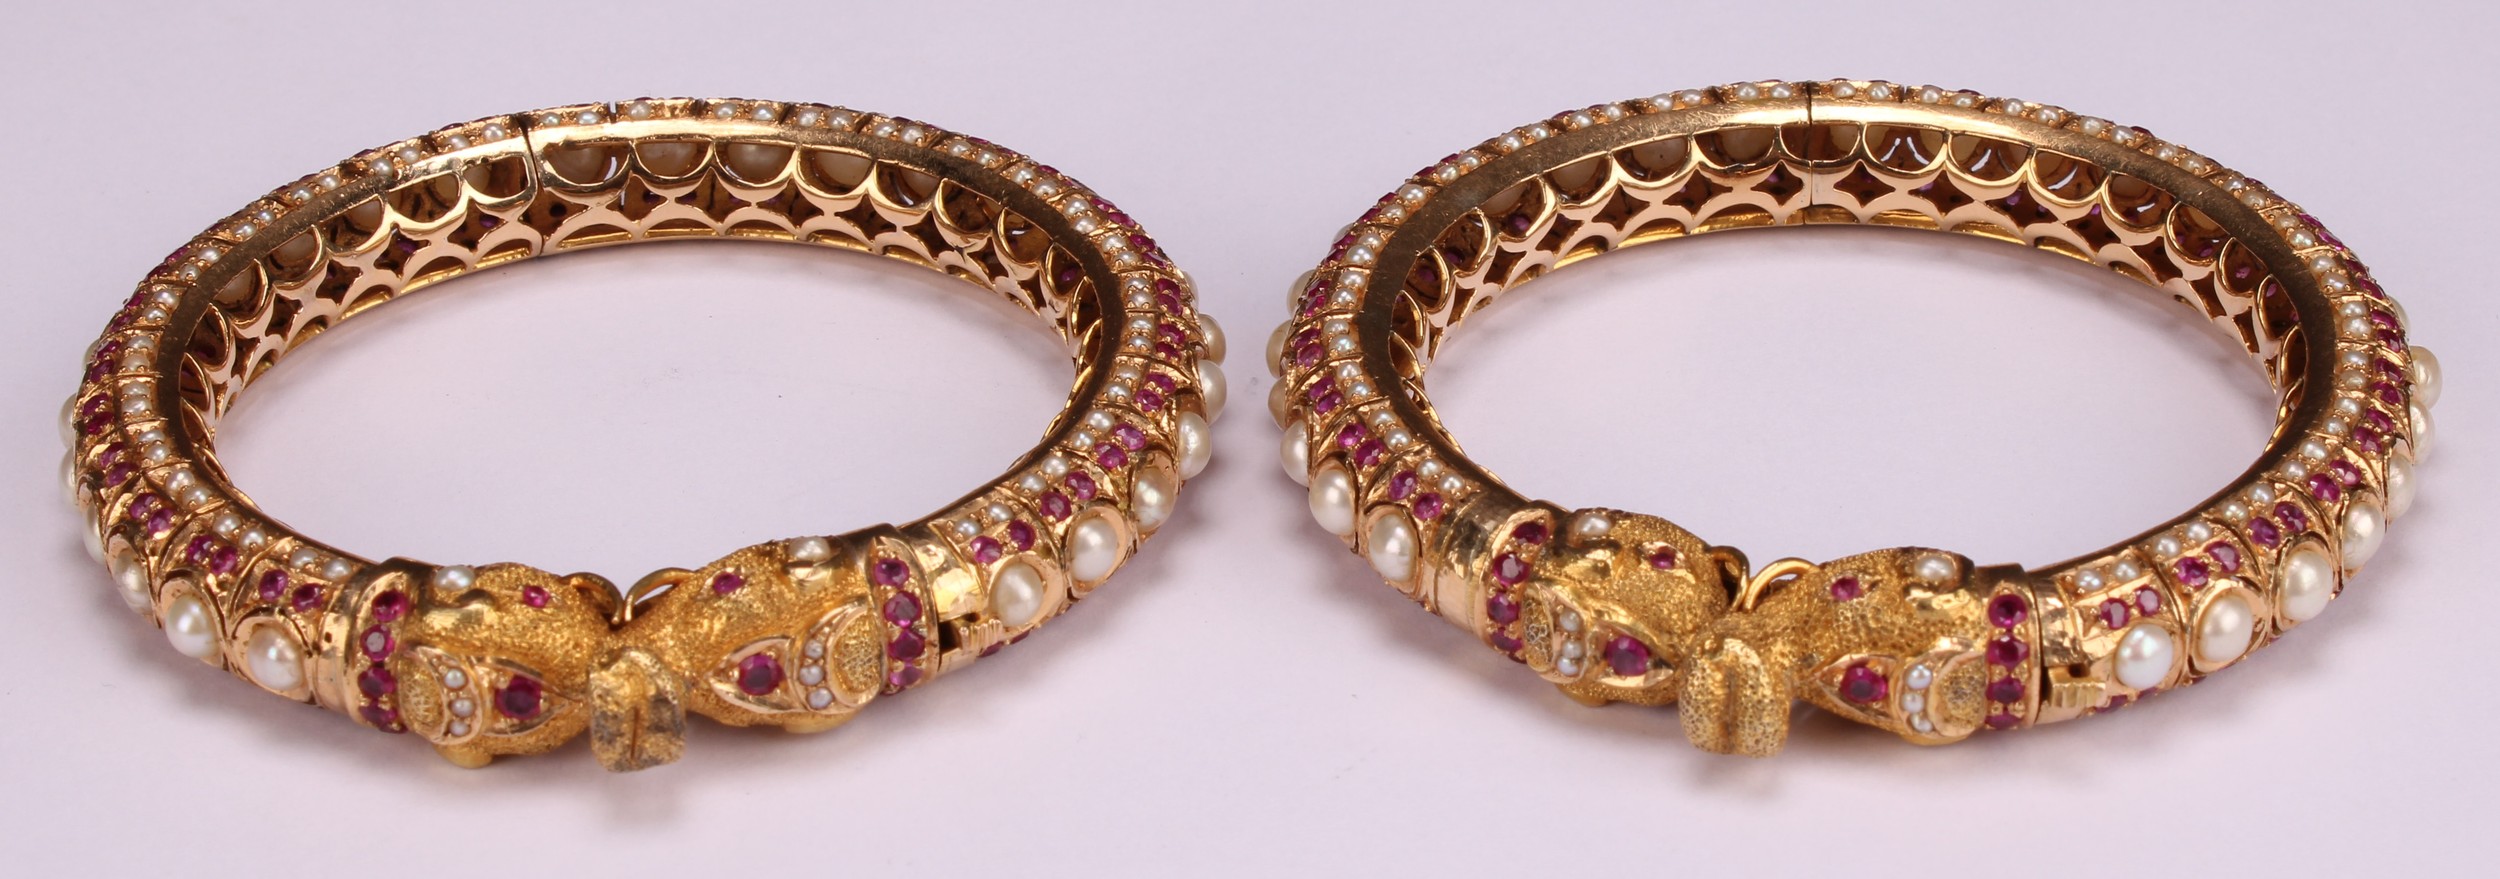 A pair of high carat gold coloured metal Indian wedding bangles, the whole inlaid with pearls - Image 2 of 11